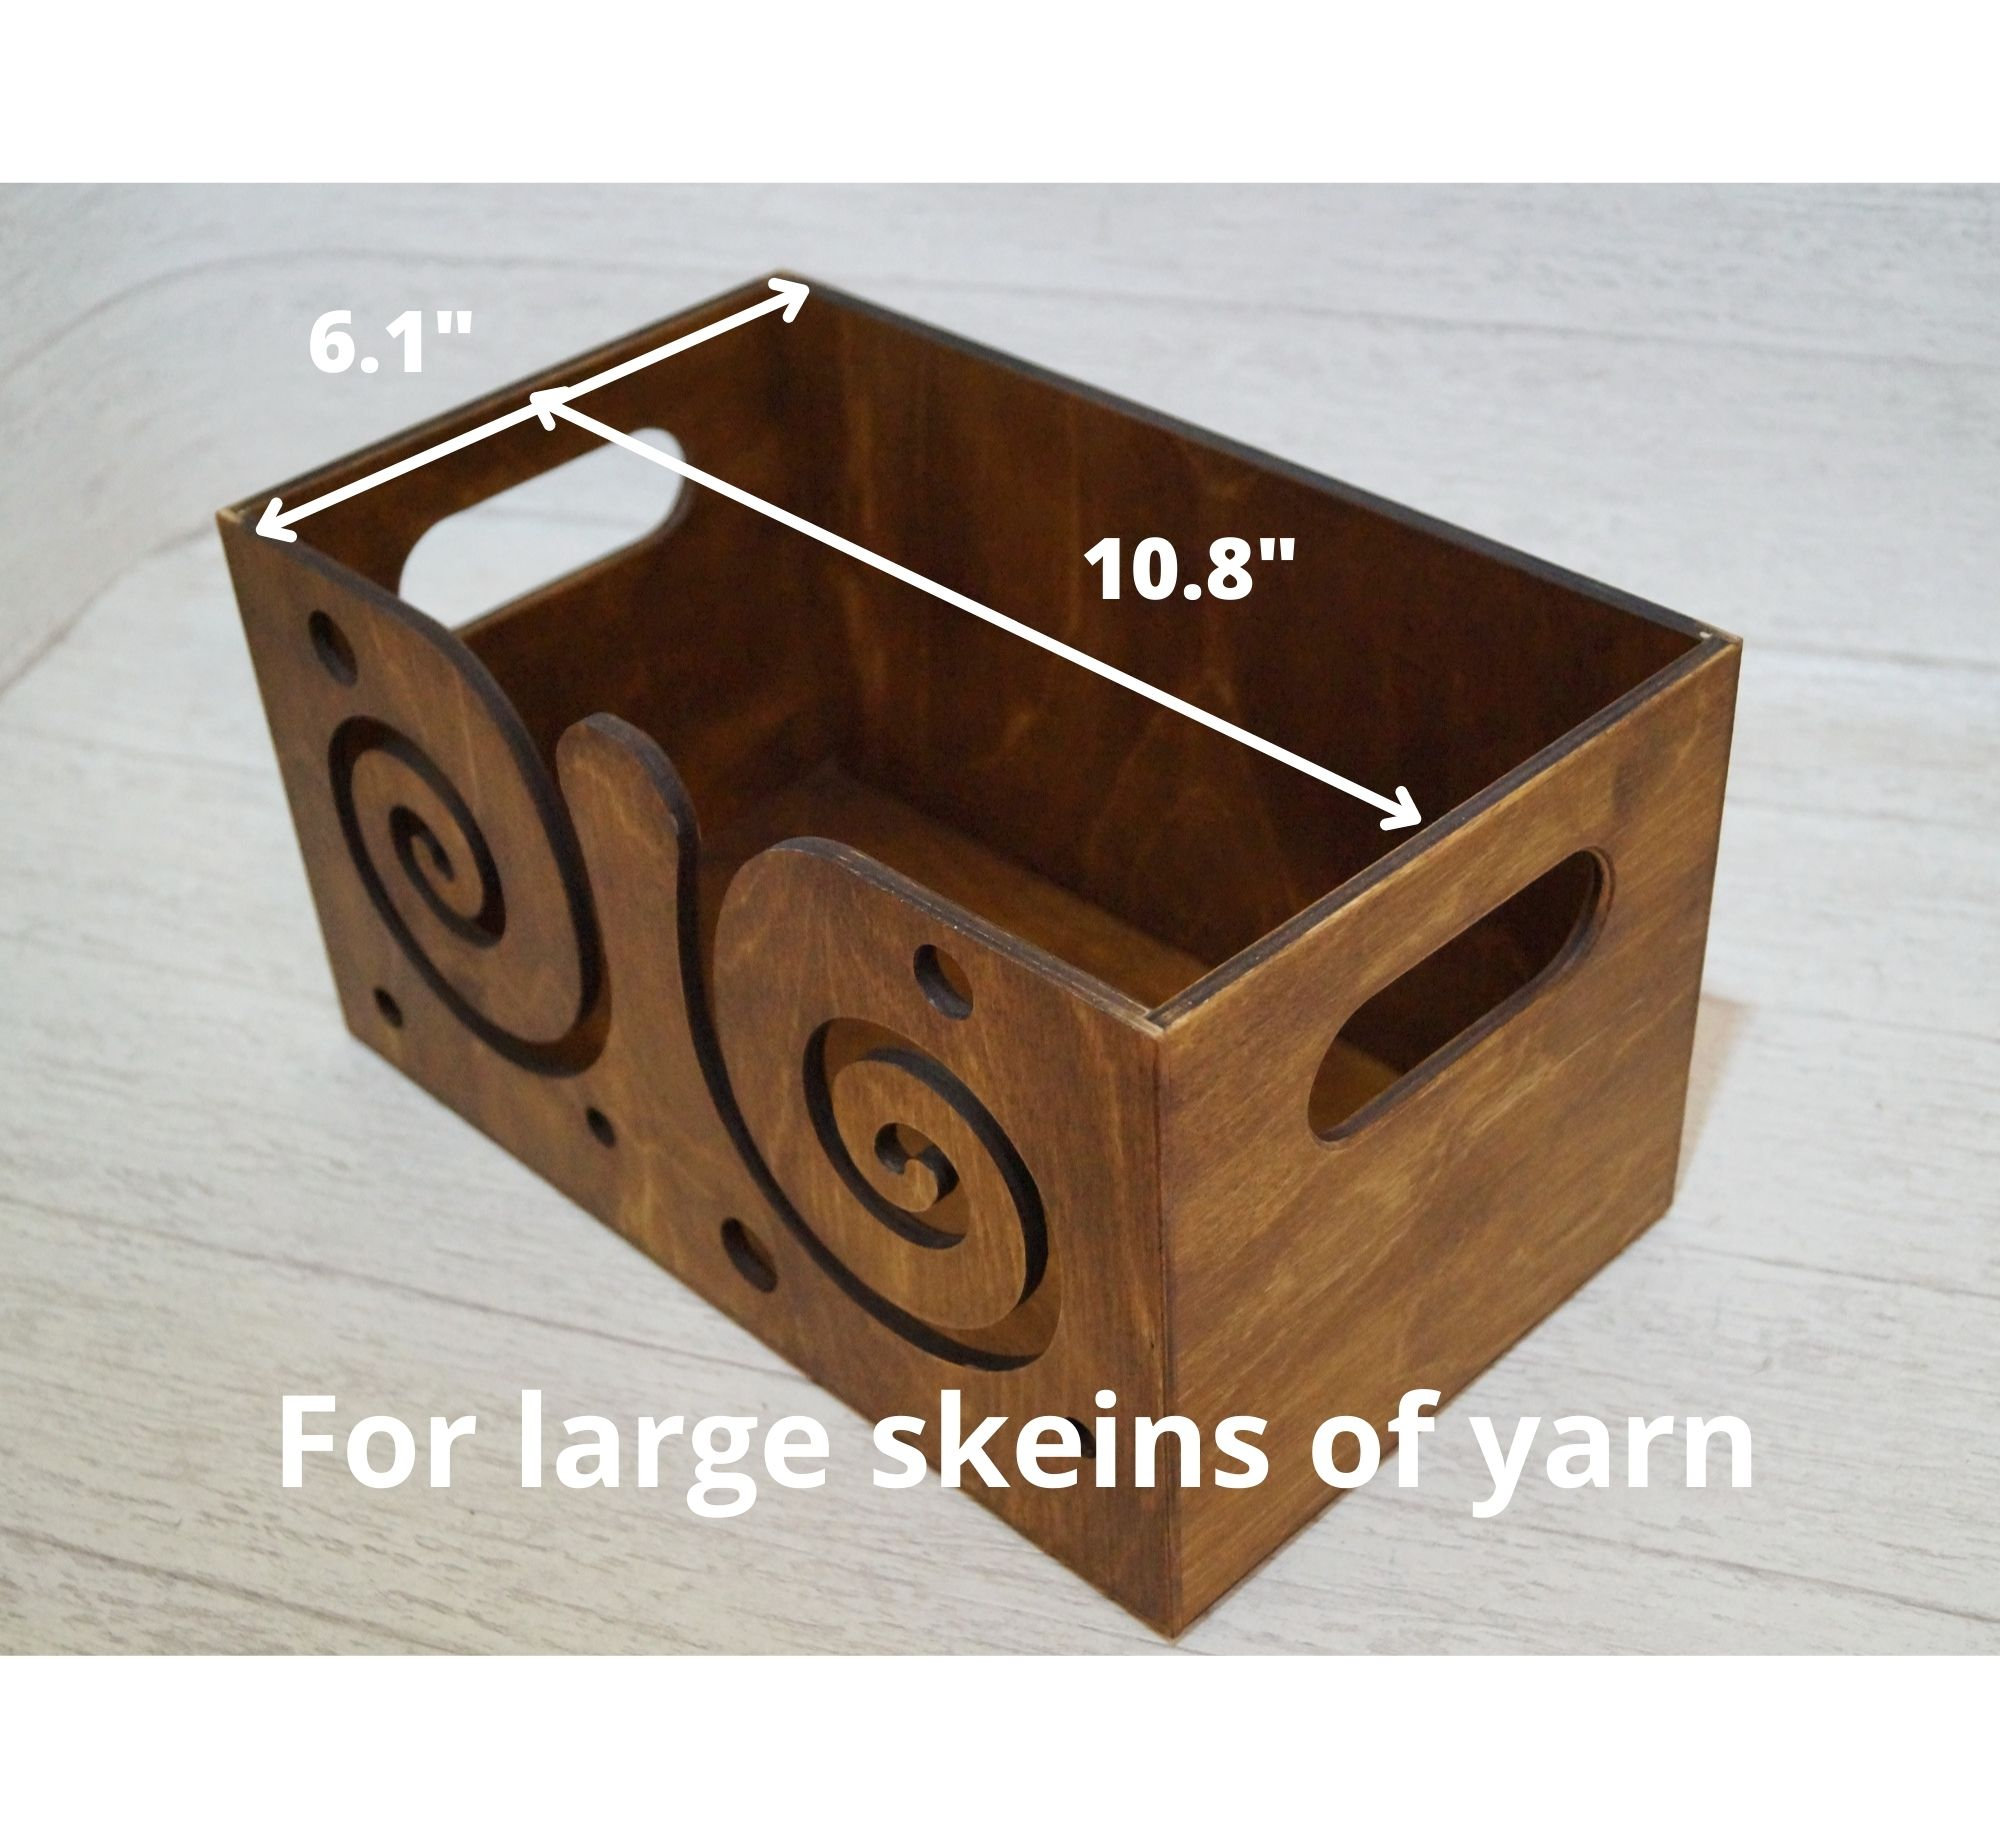 What type of wood for yarn box?